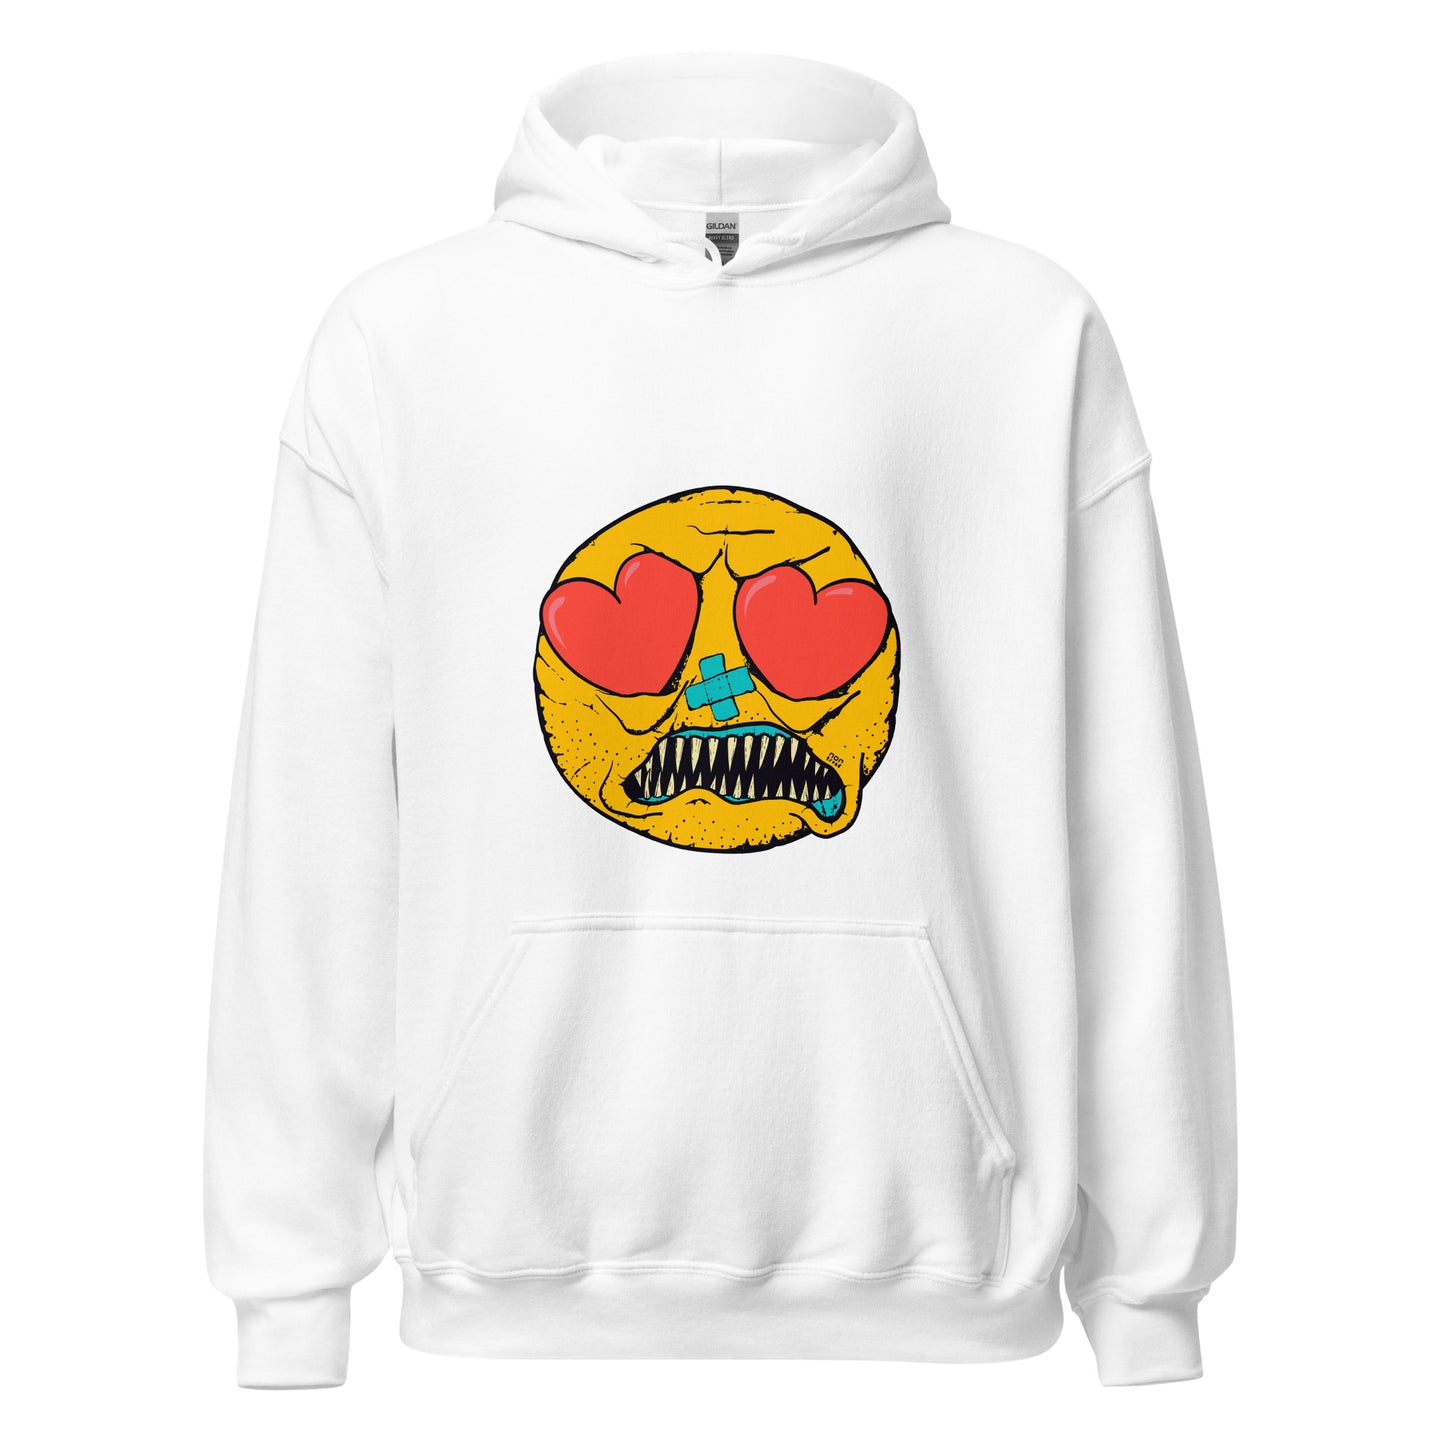 The Love Face Hoodie